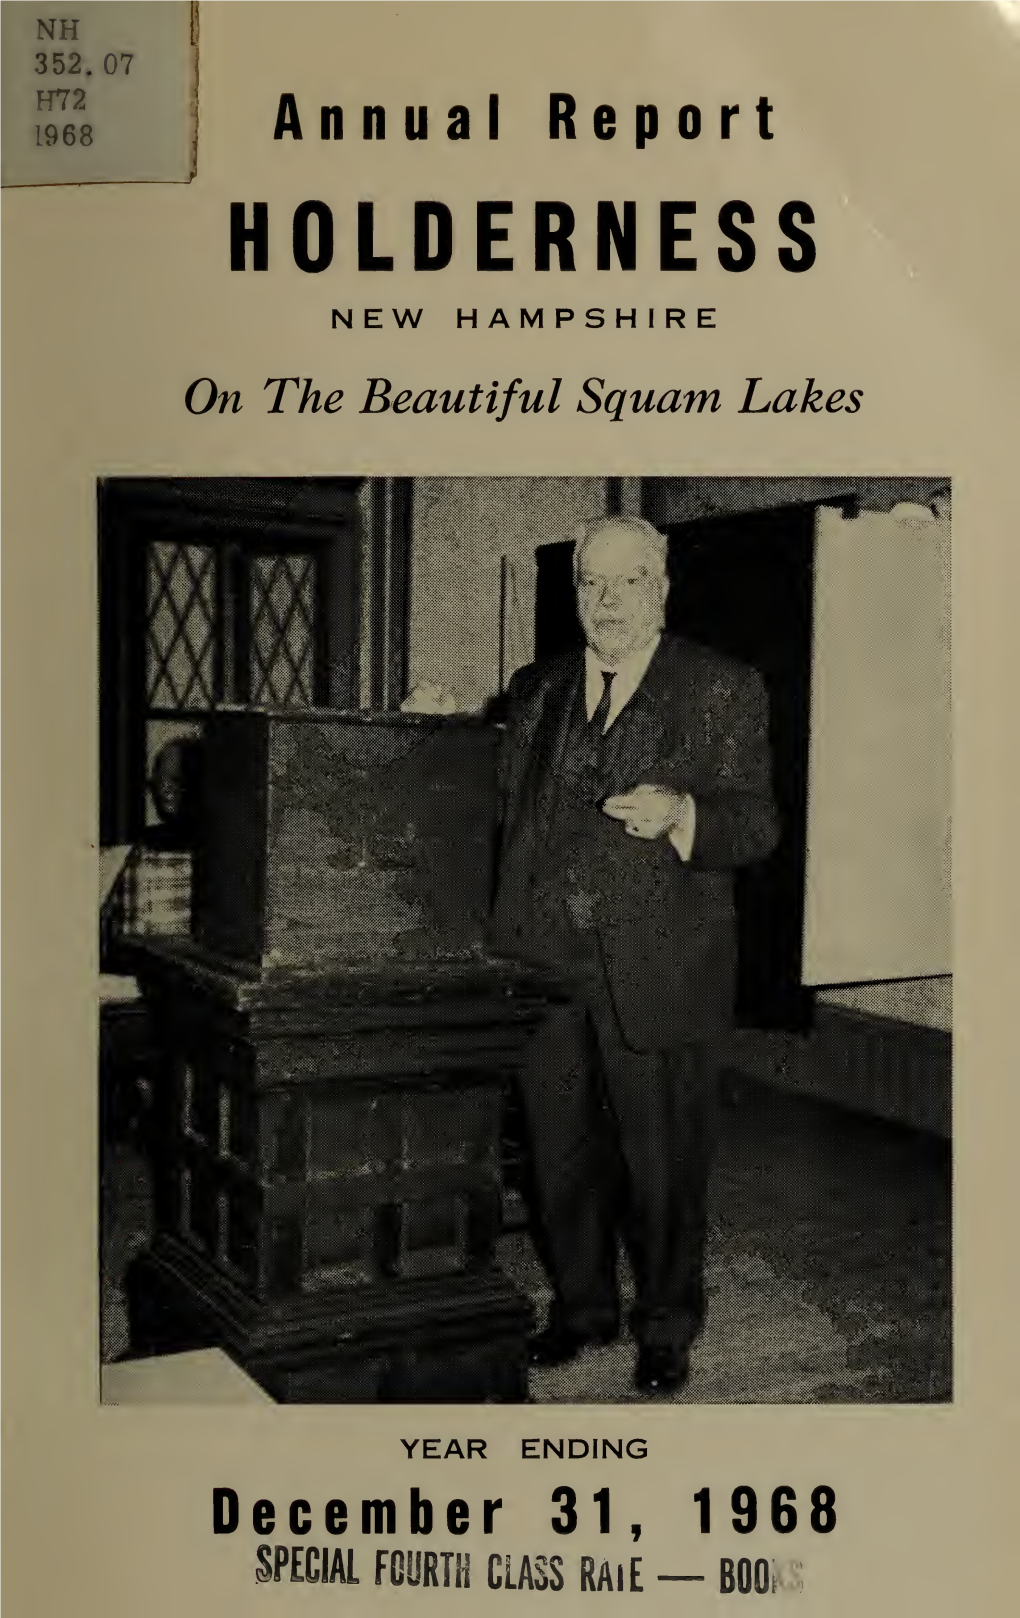 Annual Report. Holderness, New Hampshire on the Beautiful Squam Lakes. Year Ending December 31, 1968